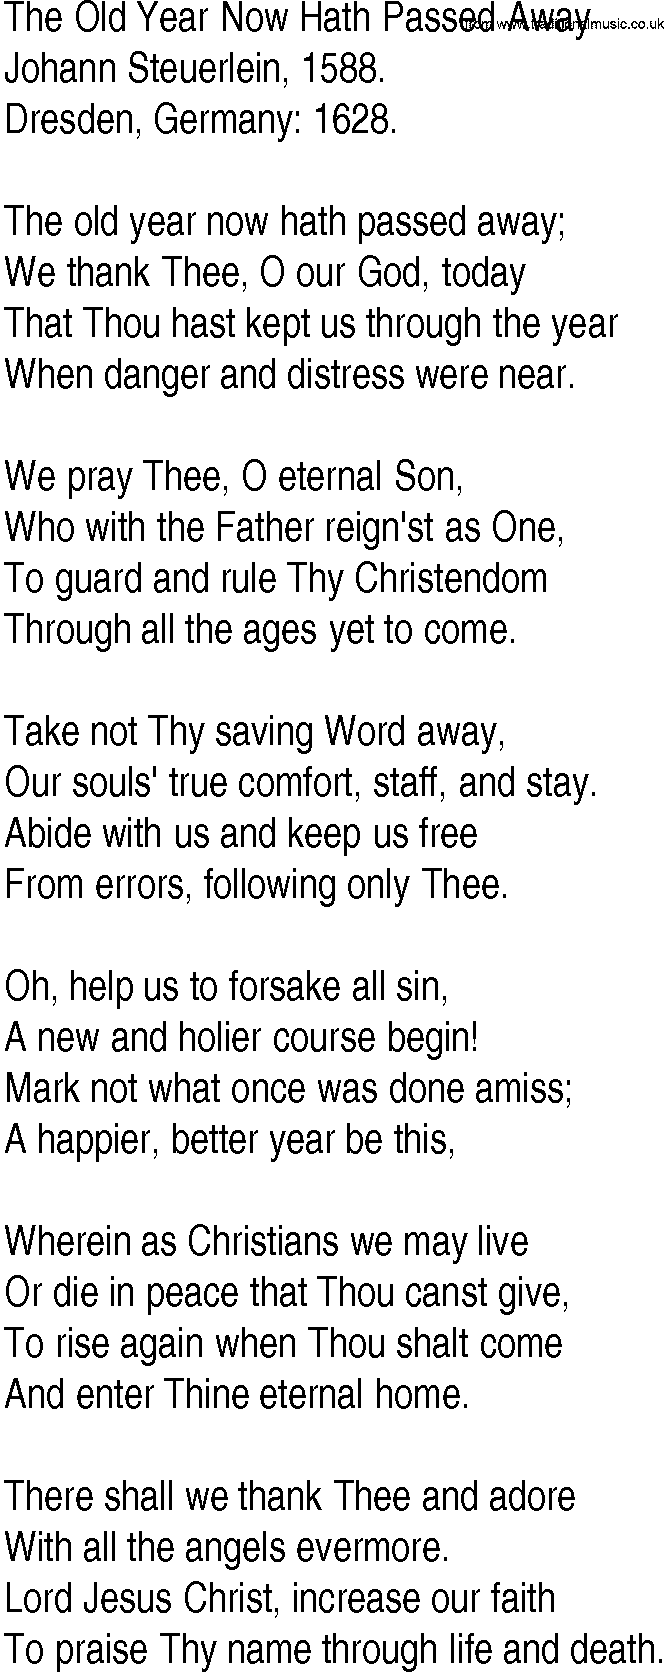 Hymn and Gospel Song: The Old Year Now Hath Passed Away by Johann Steuerlein lyrics